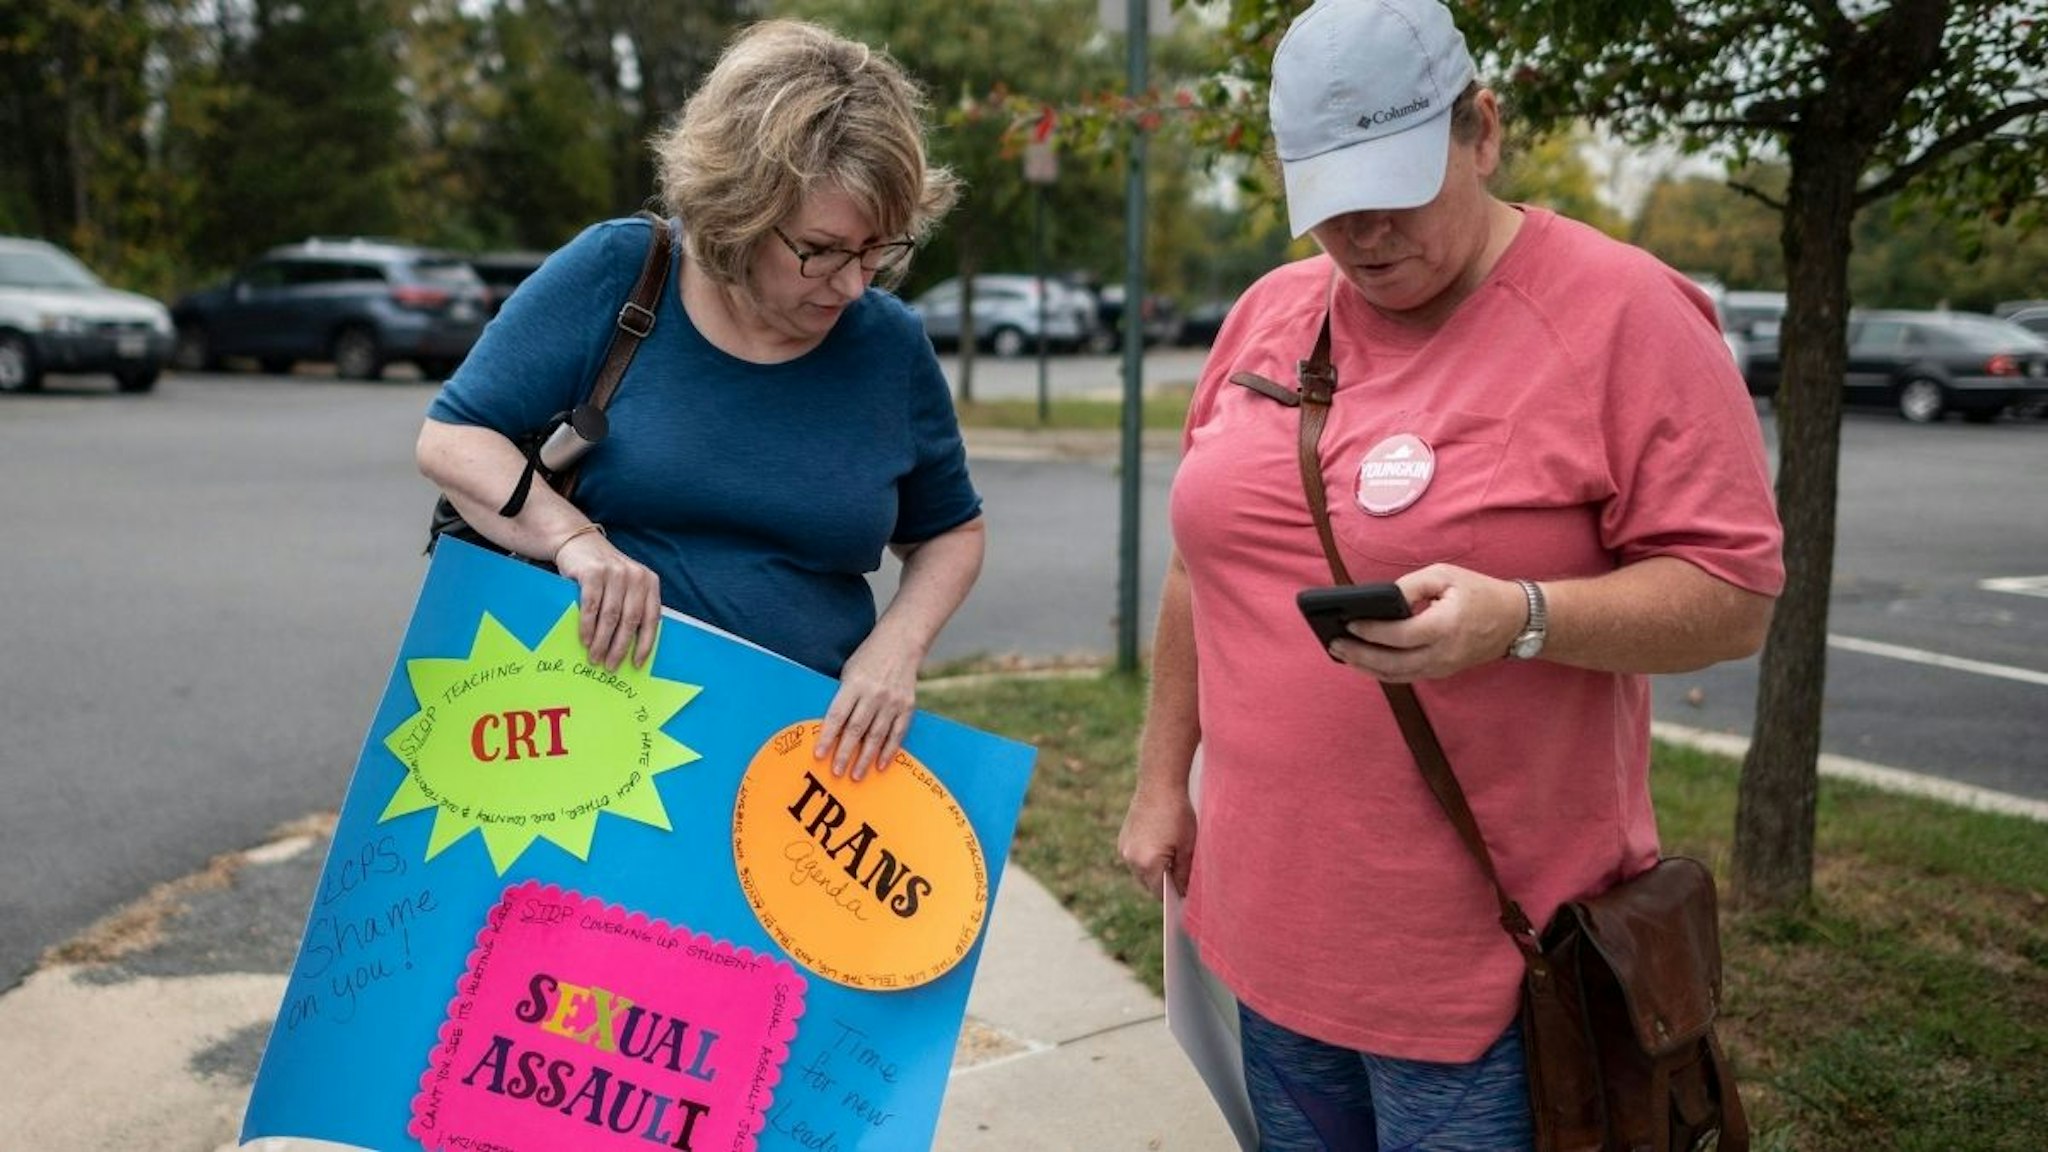 Protesters and activists stand outside a Loudoun County Public Schools (LCPS) board meeting in Ashburn, Virginia on October 12, 2021.